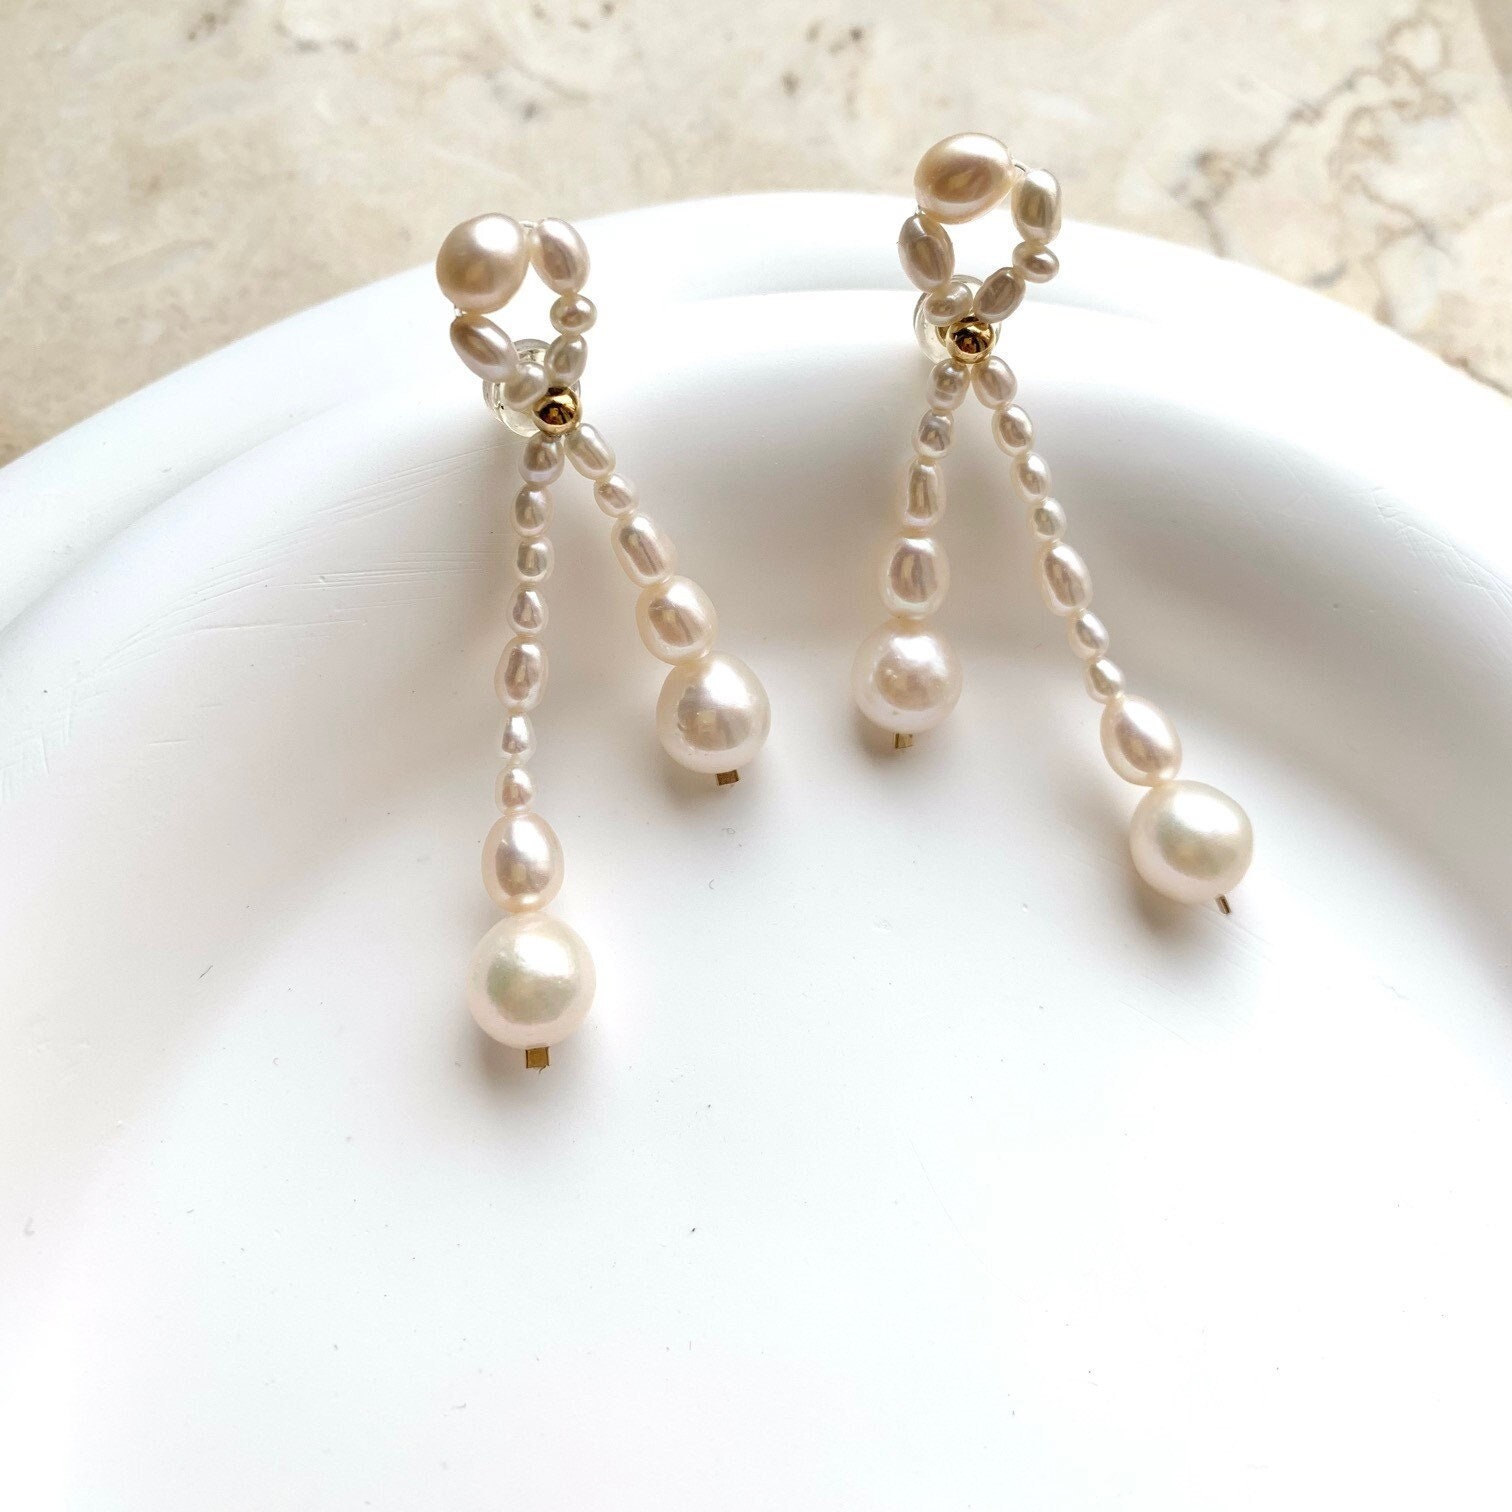 14K Gold Filled Bow Knot Pearl Drop Earrings, Unique Long Dangle Beads Gift For Her